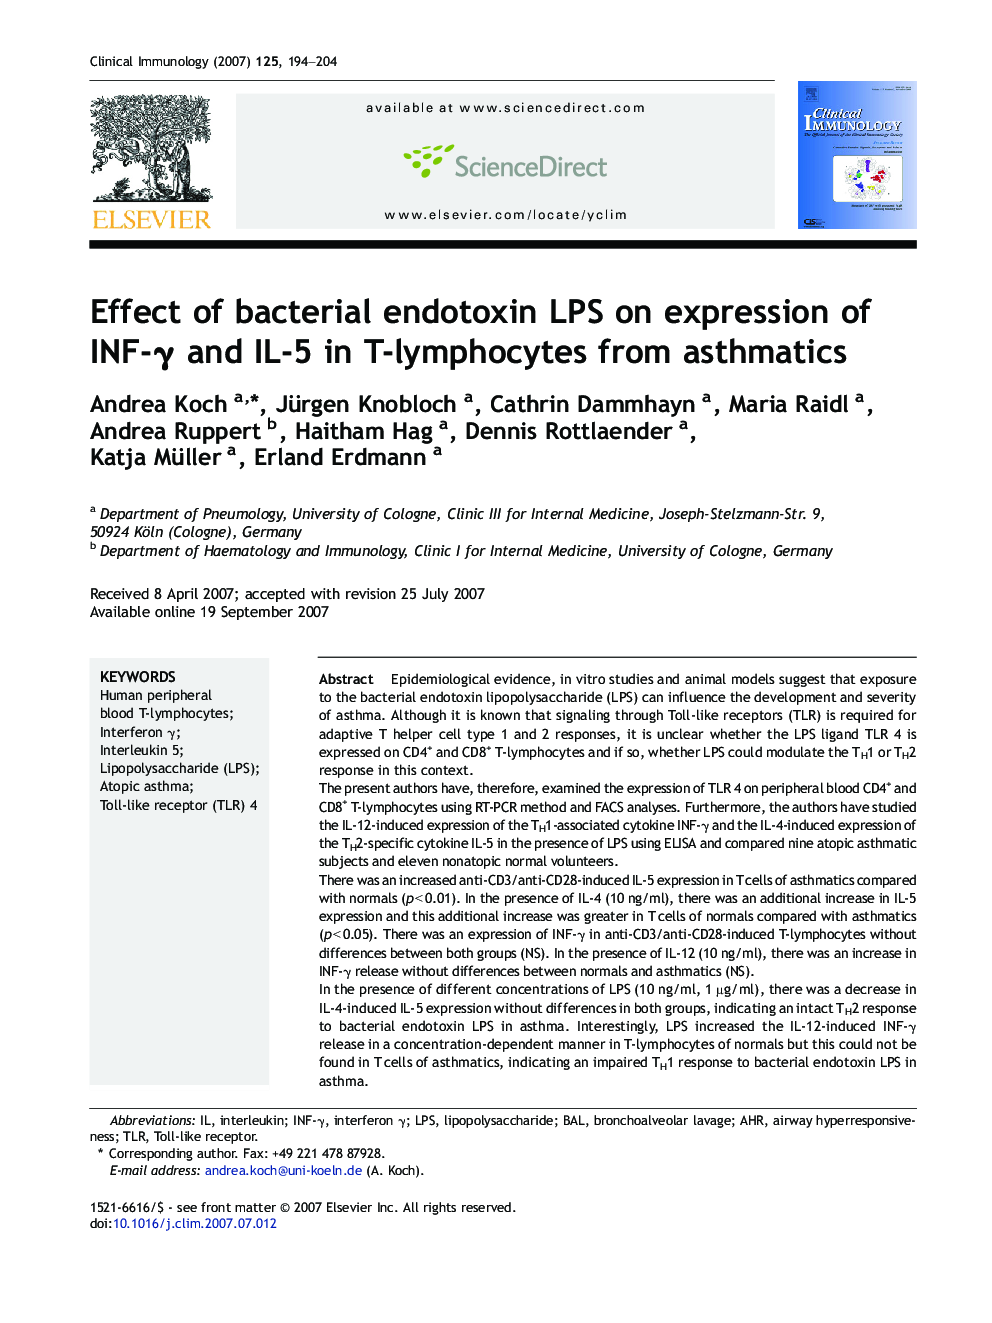 Effect of bacterial endotoxin LPS on expression of INF-γ and IL-5 in T-lymphocytes from asthmatics